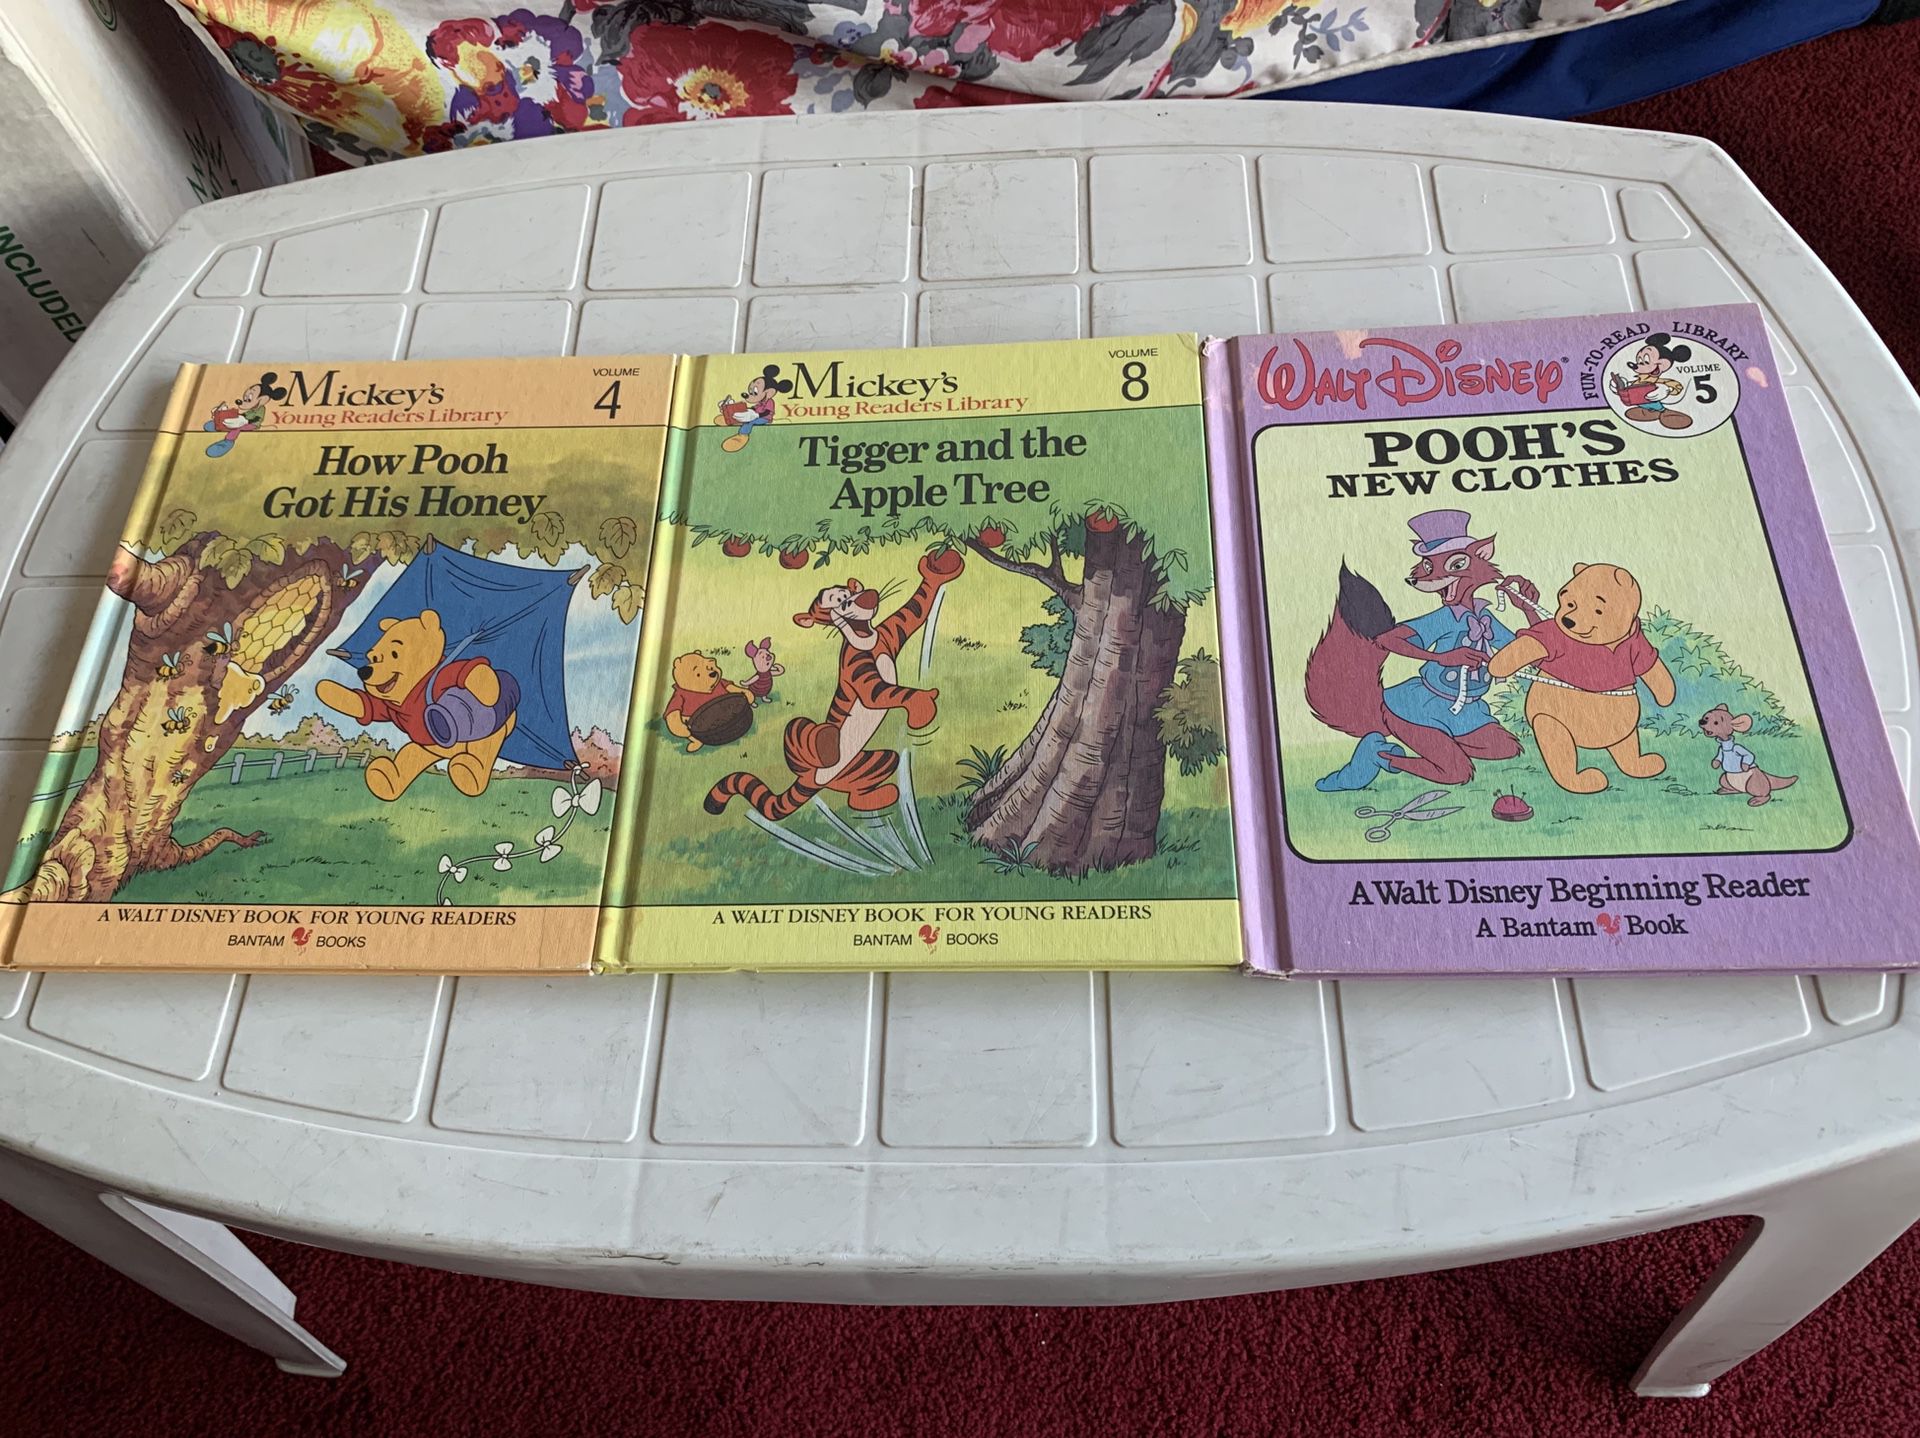 Winnie the Pooh 3 Assorted Bantan Books for $5